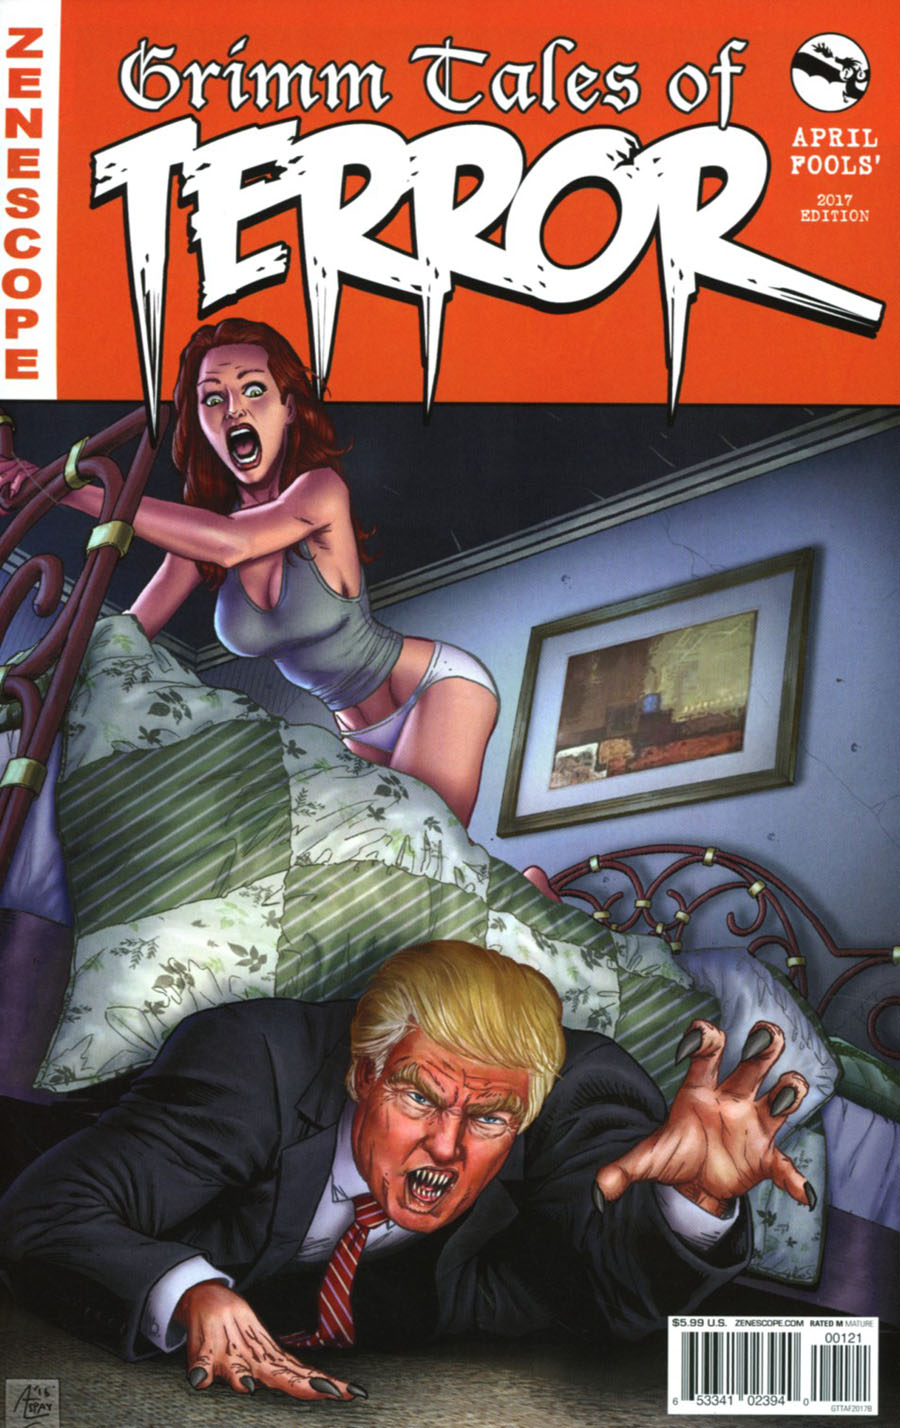 Grimm Fairy Tales Presents Grimm Tales Of Terror April Fools Edition 2017 Cover B Anthony Spay